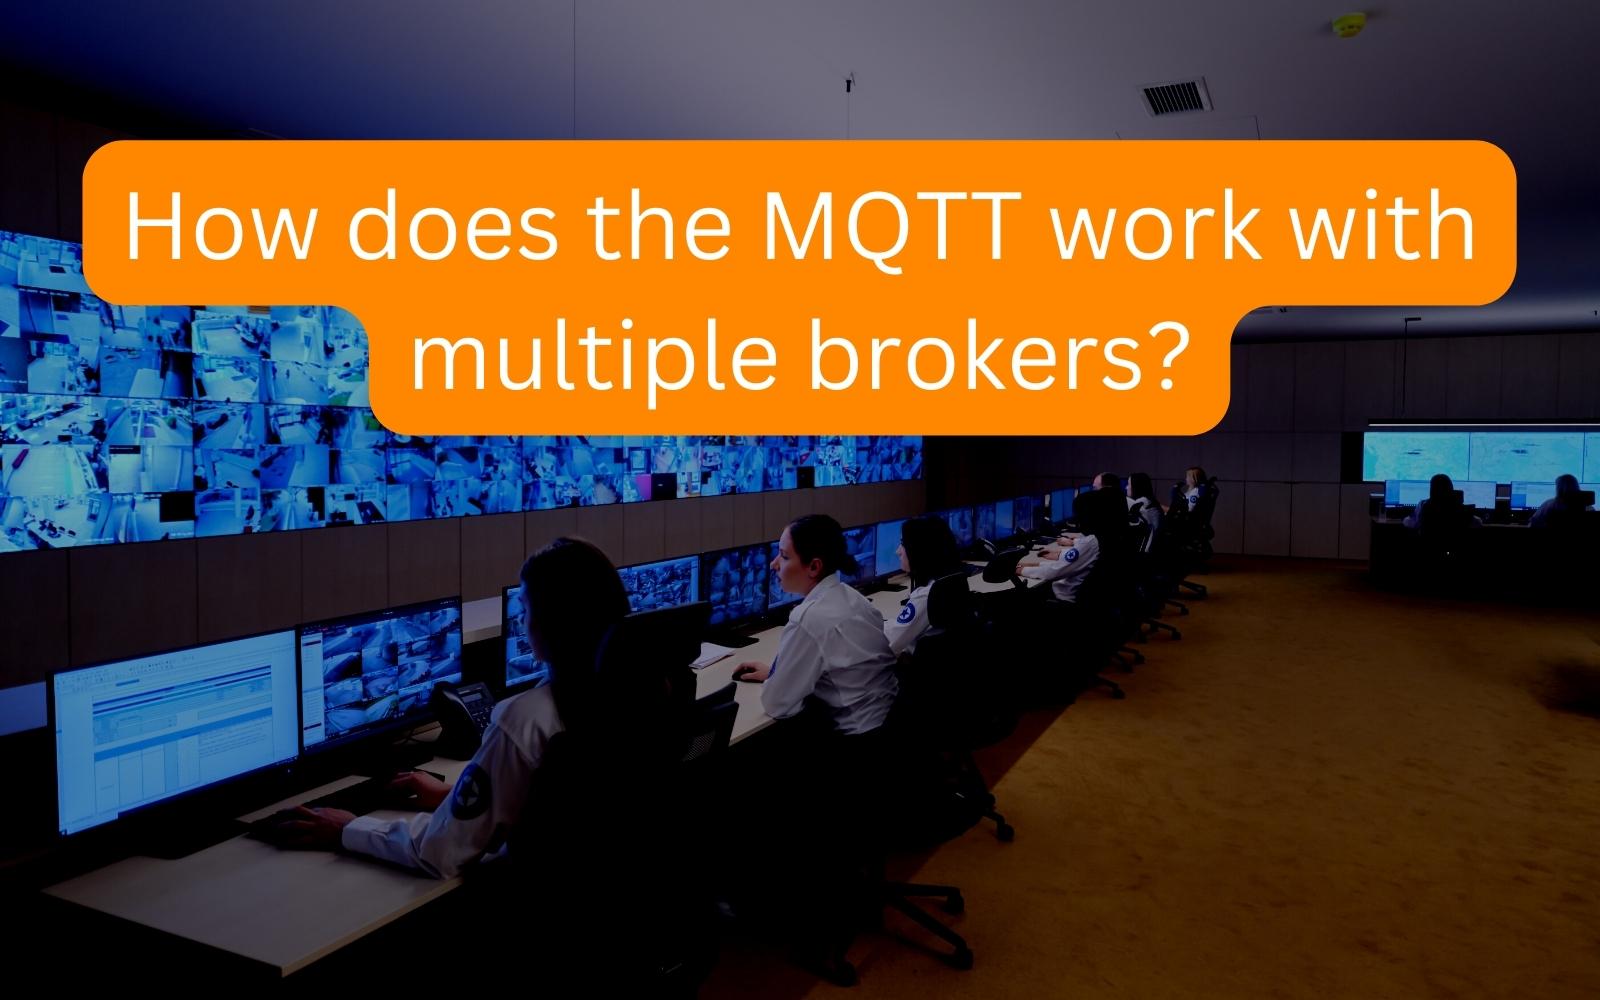 How does the MQTT work with multiple brokers